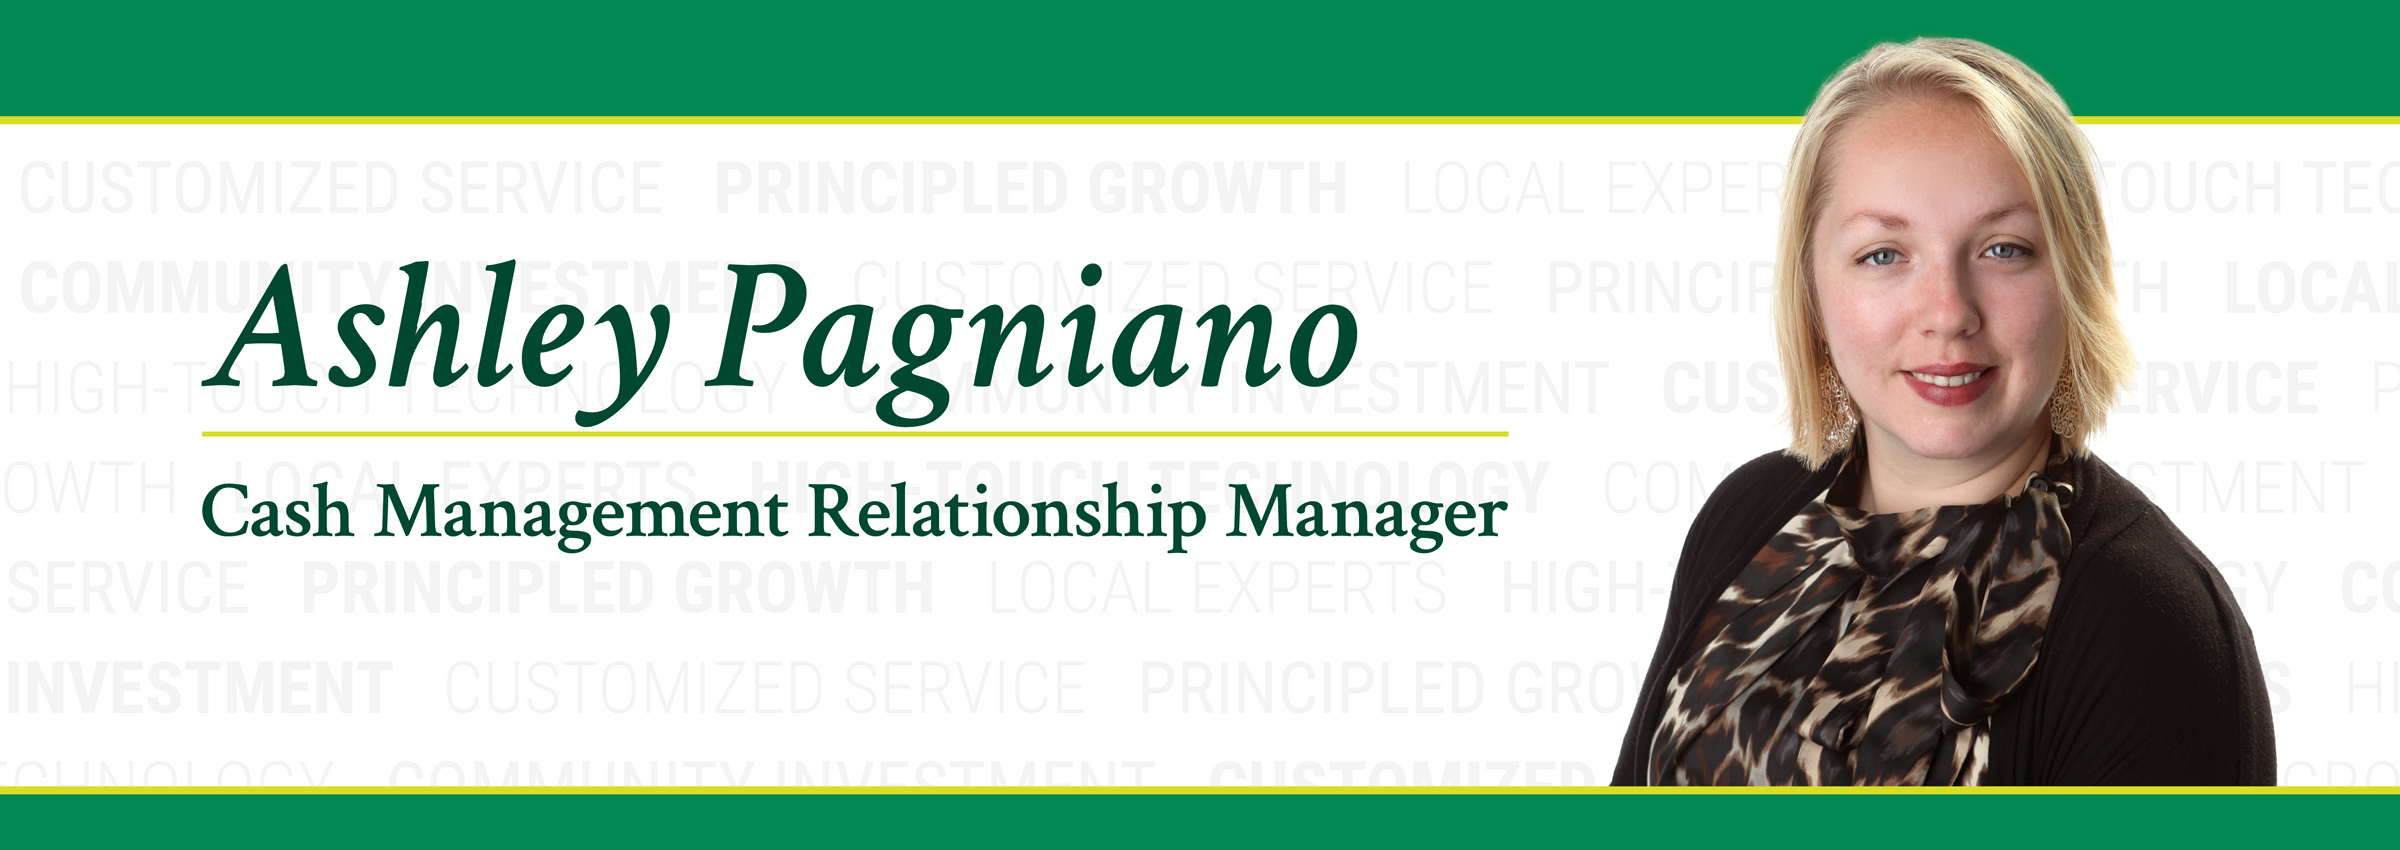 Ashley Pagniano Banner